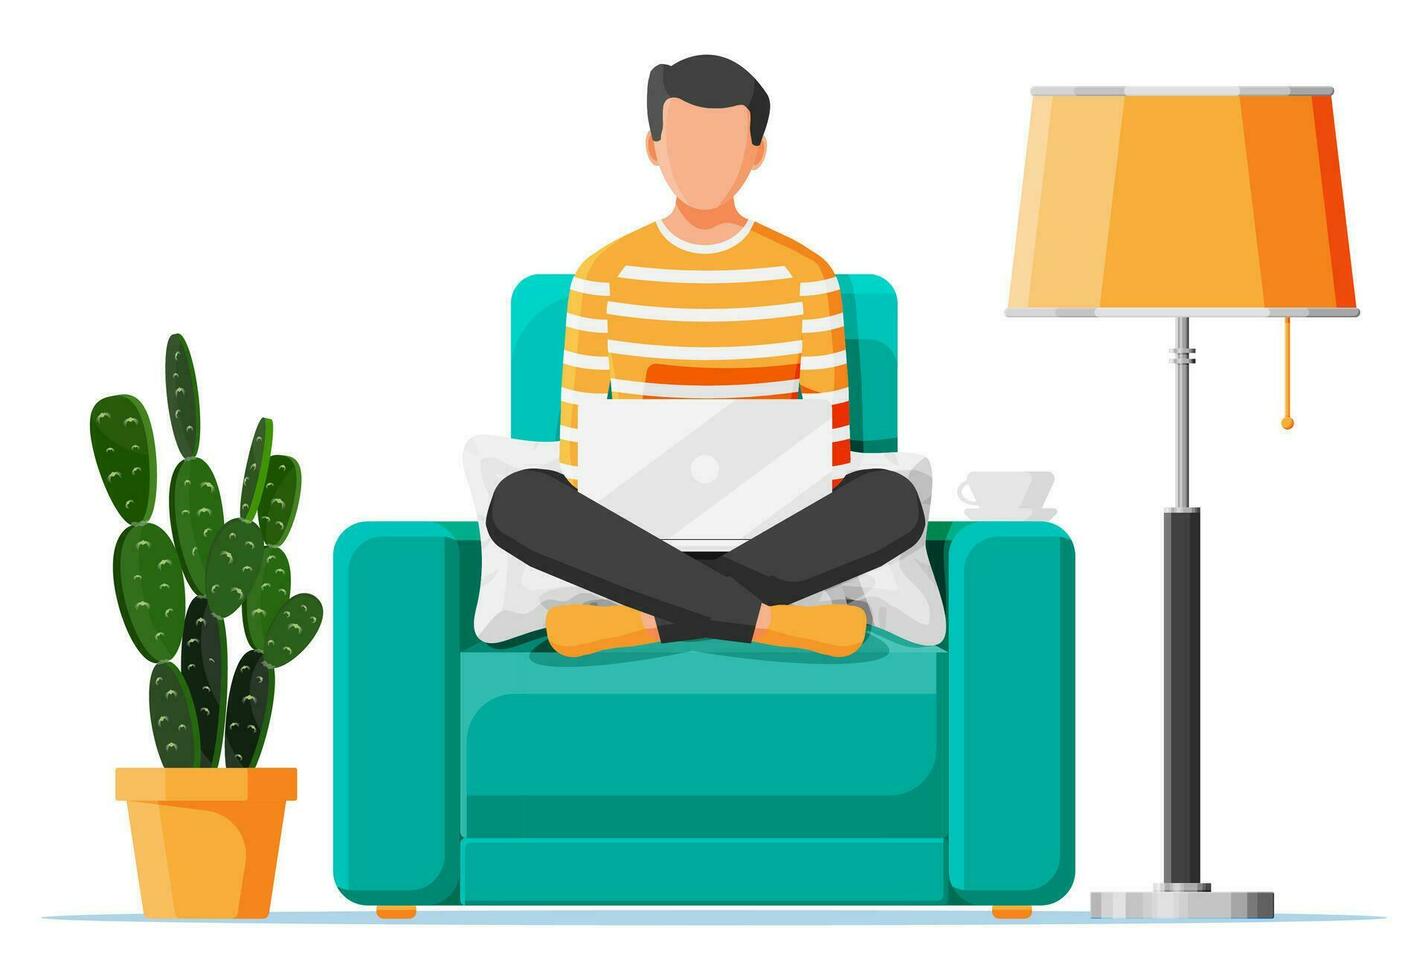 Freelancer boy in armchair works at home. Comfortable workplace interior with plant, floor lamp. Young man in chair with laptop, cup of drink. Remote work online education. Flat vector illustration